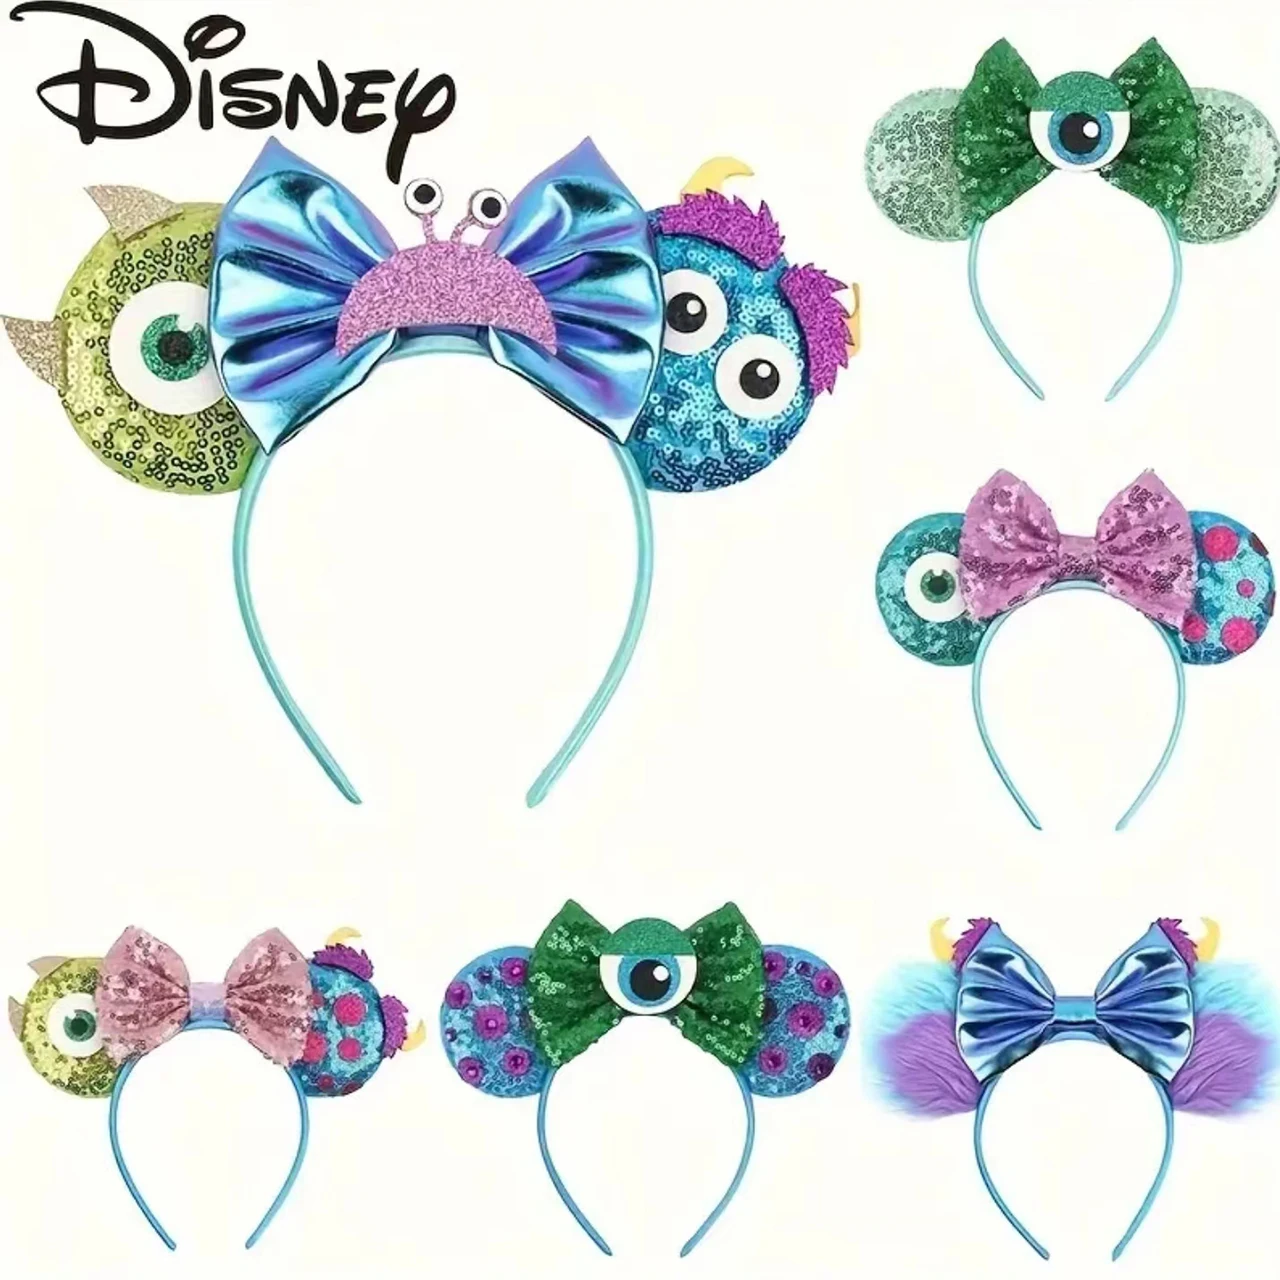 

Disney Monsters University Minnie Mouse Ears Headband, Cute & Sweet Cartoon Cosplay Hair Accessory For Party